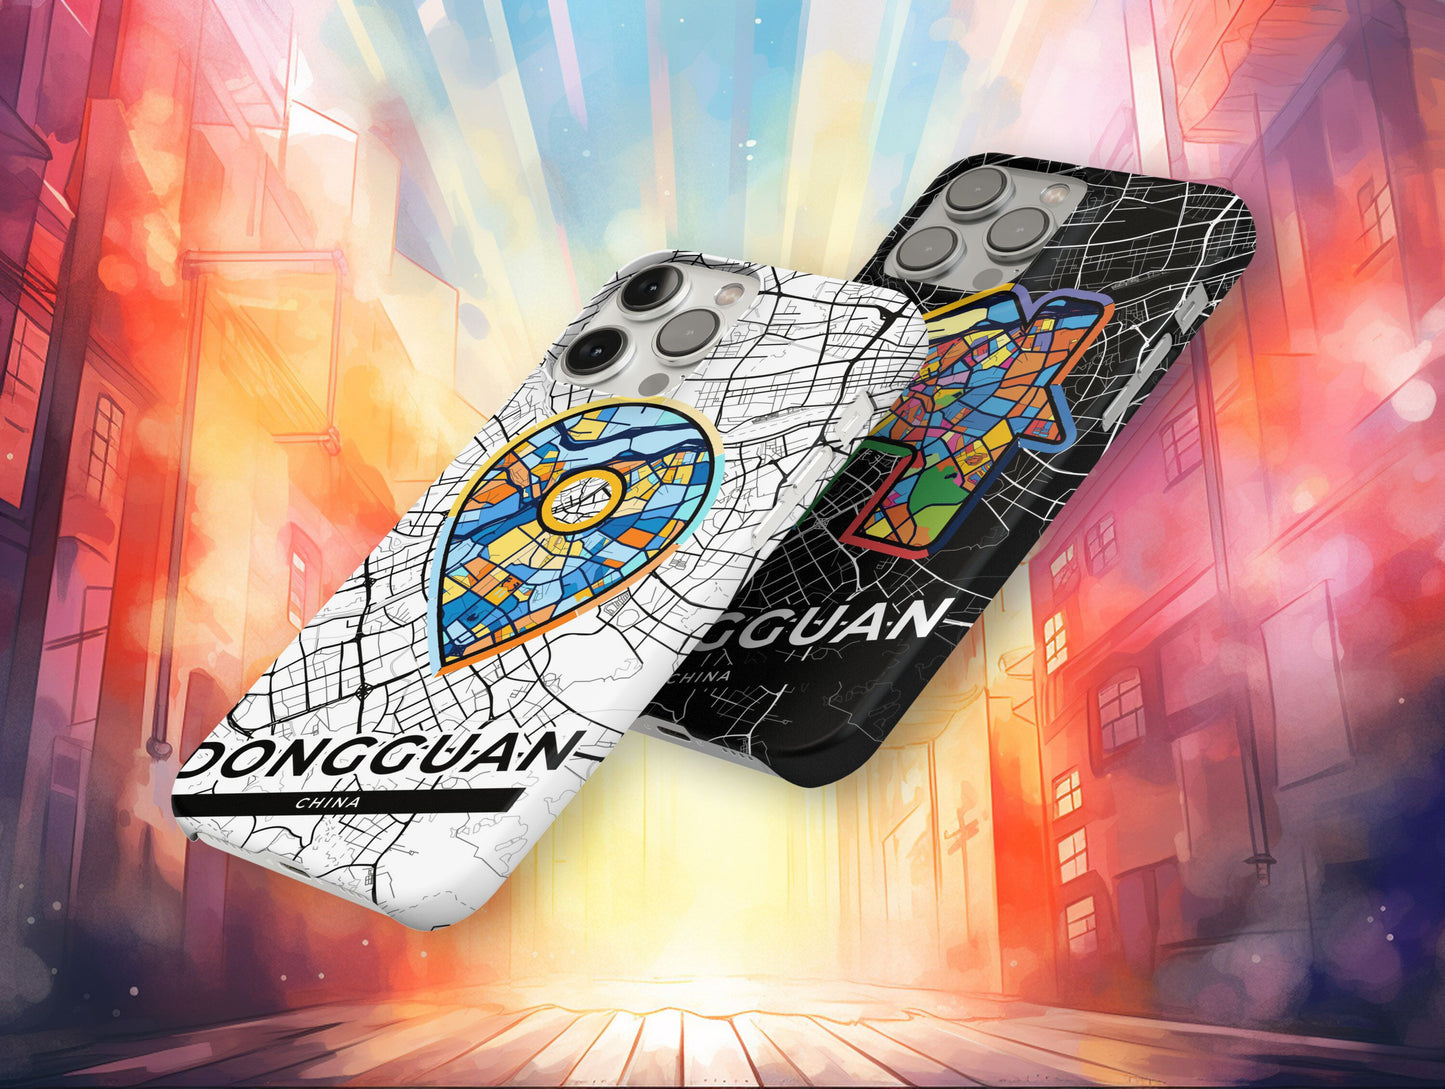 Dongguan China slim phone case with colorful icon. Birthday, wedding or housewarming gift. Couple match cases.